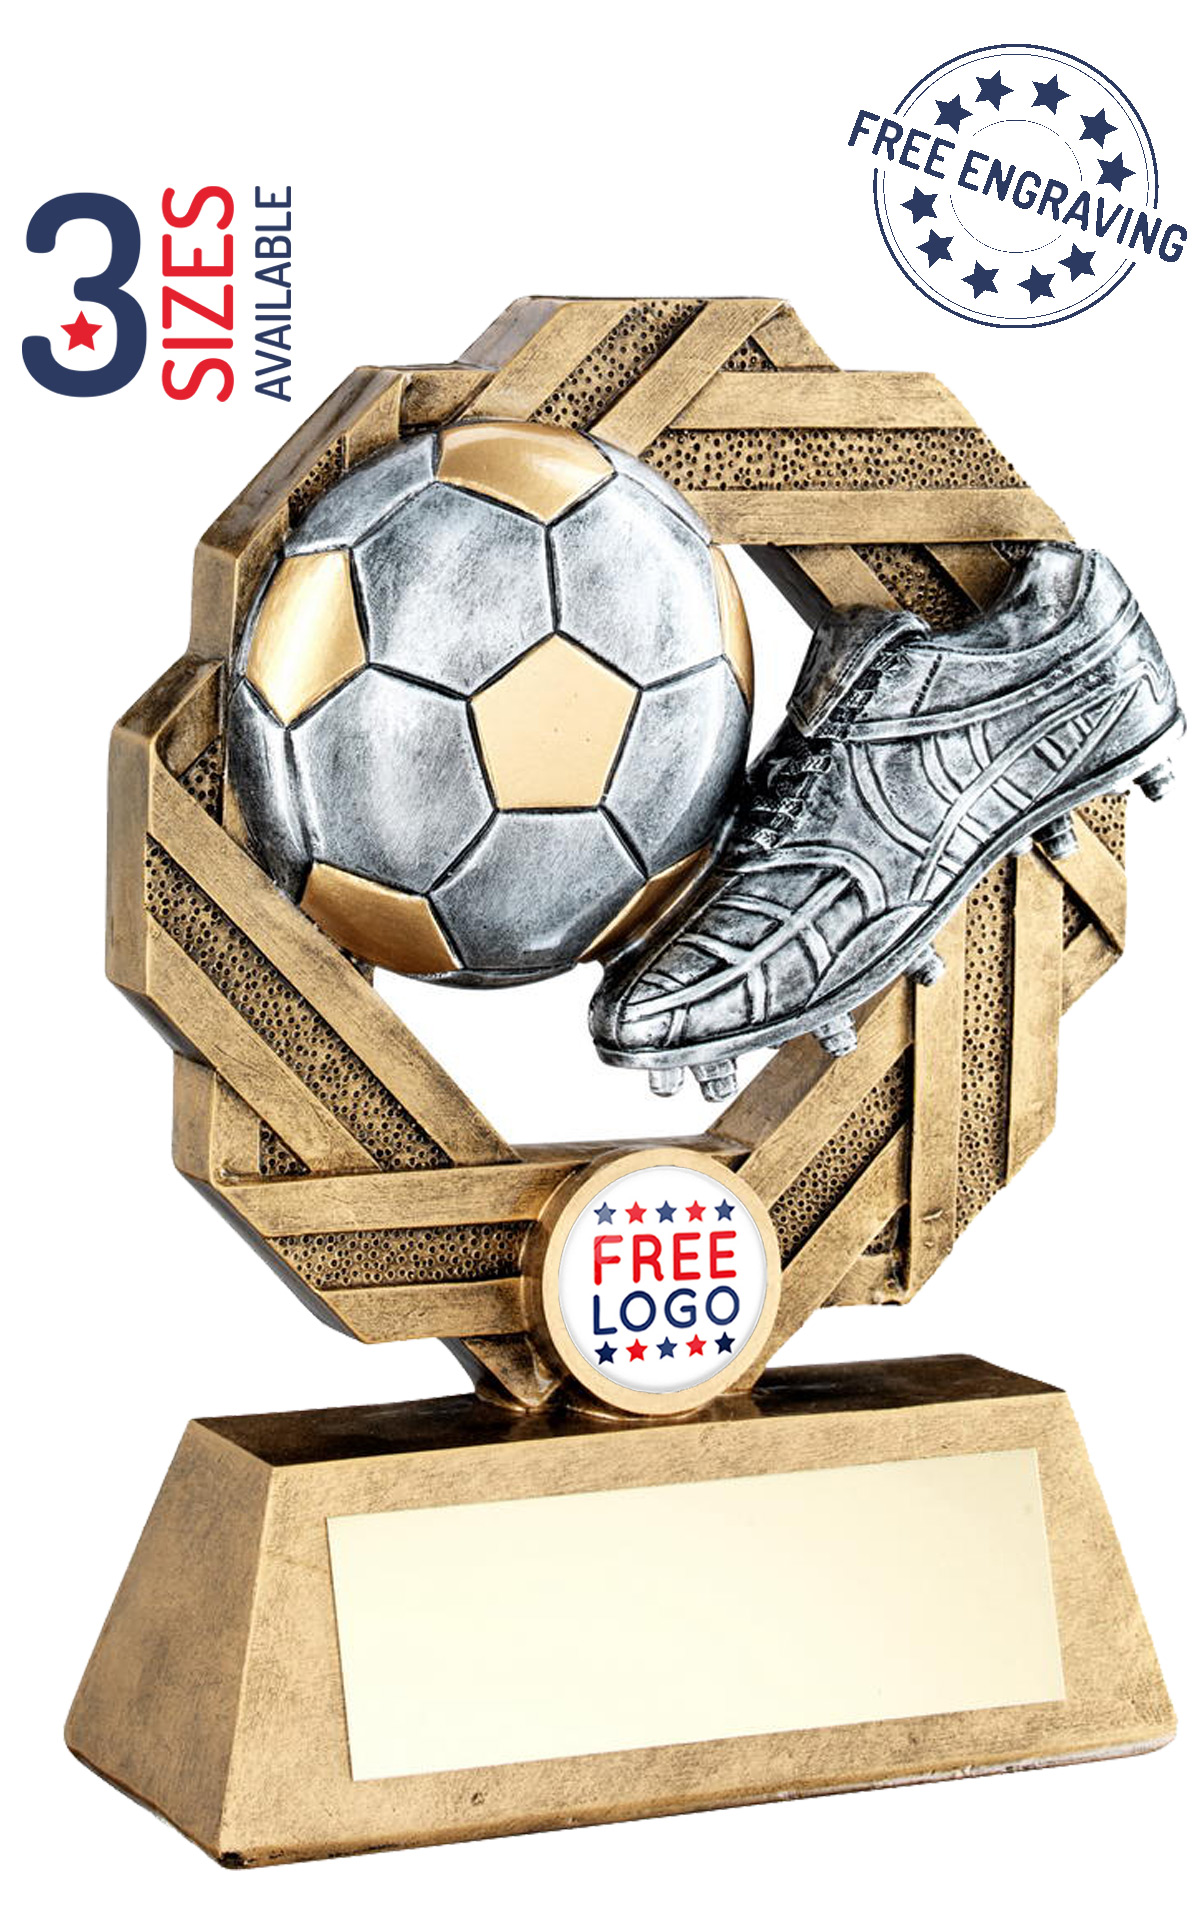 FREE Engraving FREE P&P Star Players Boot & Ball Trophy